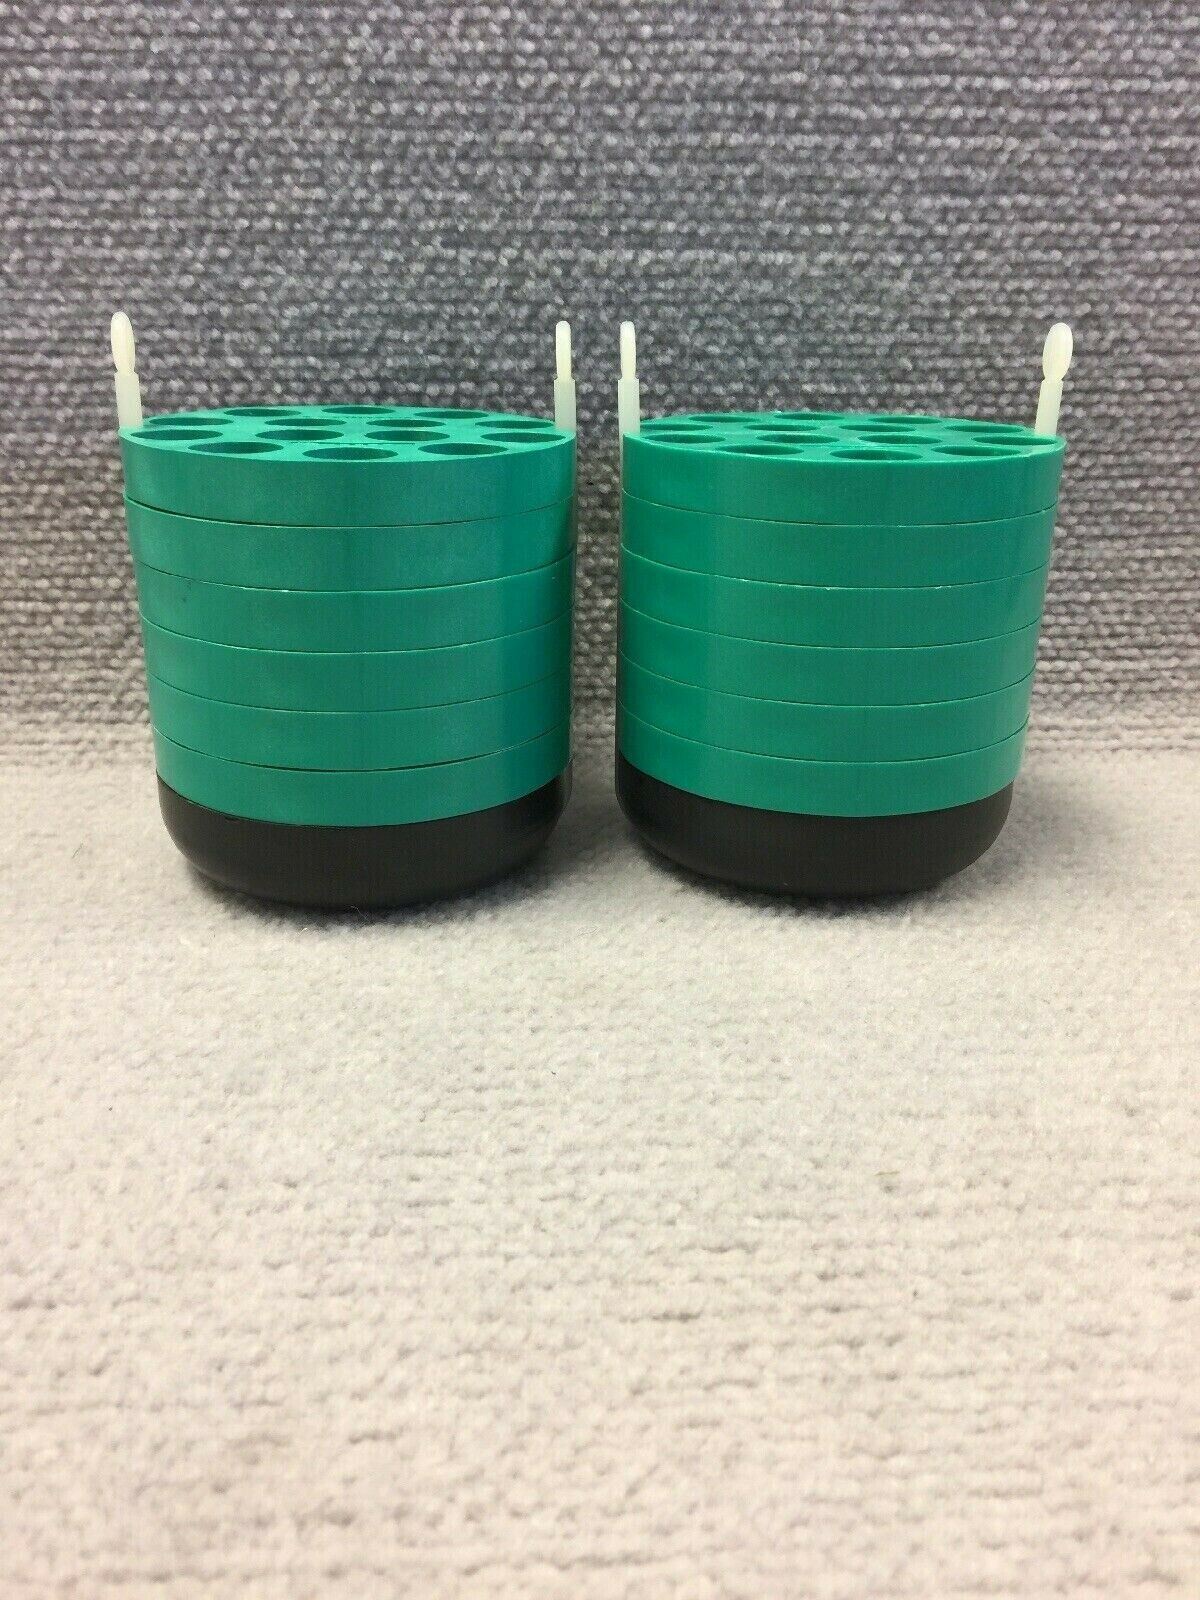 Beckman Coulter 349950 14x 15ml Tube Bucket Insert Green & Pads Set of 2